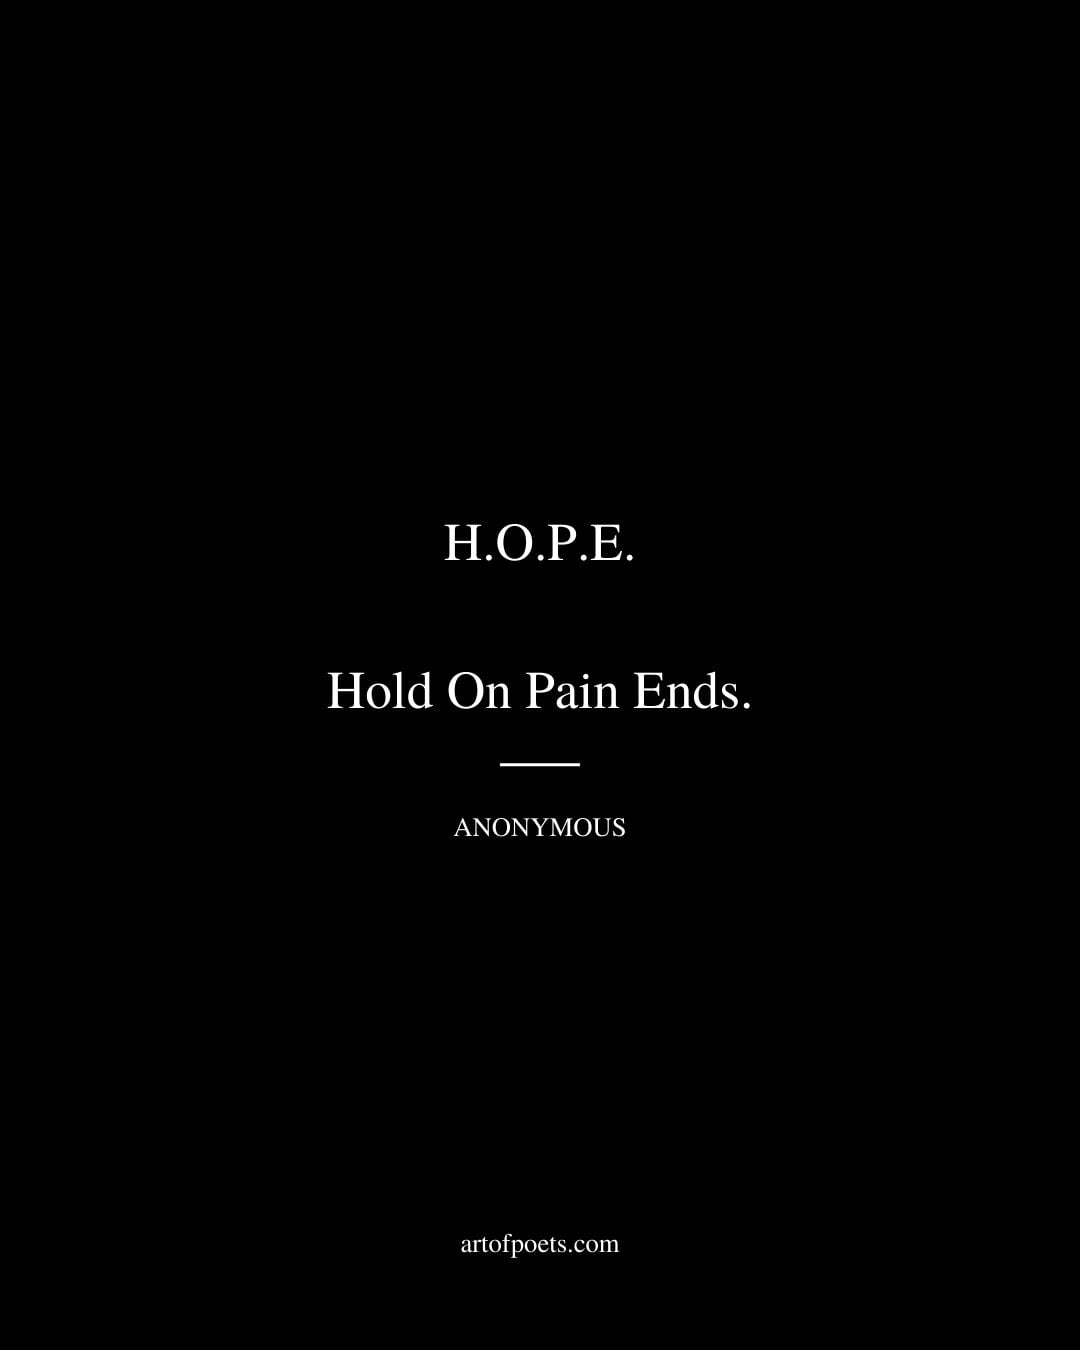 H.O.P.E. – Hold On Pain Ends. Anonymous